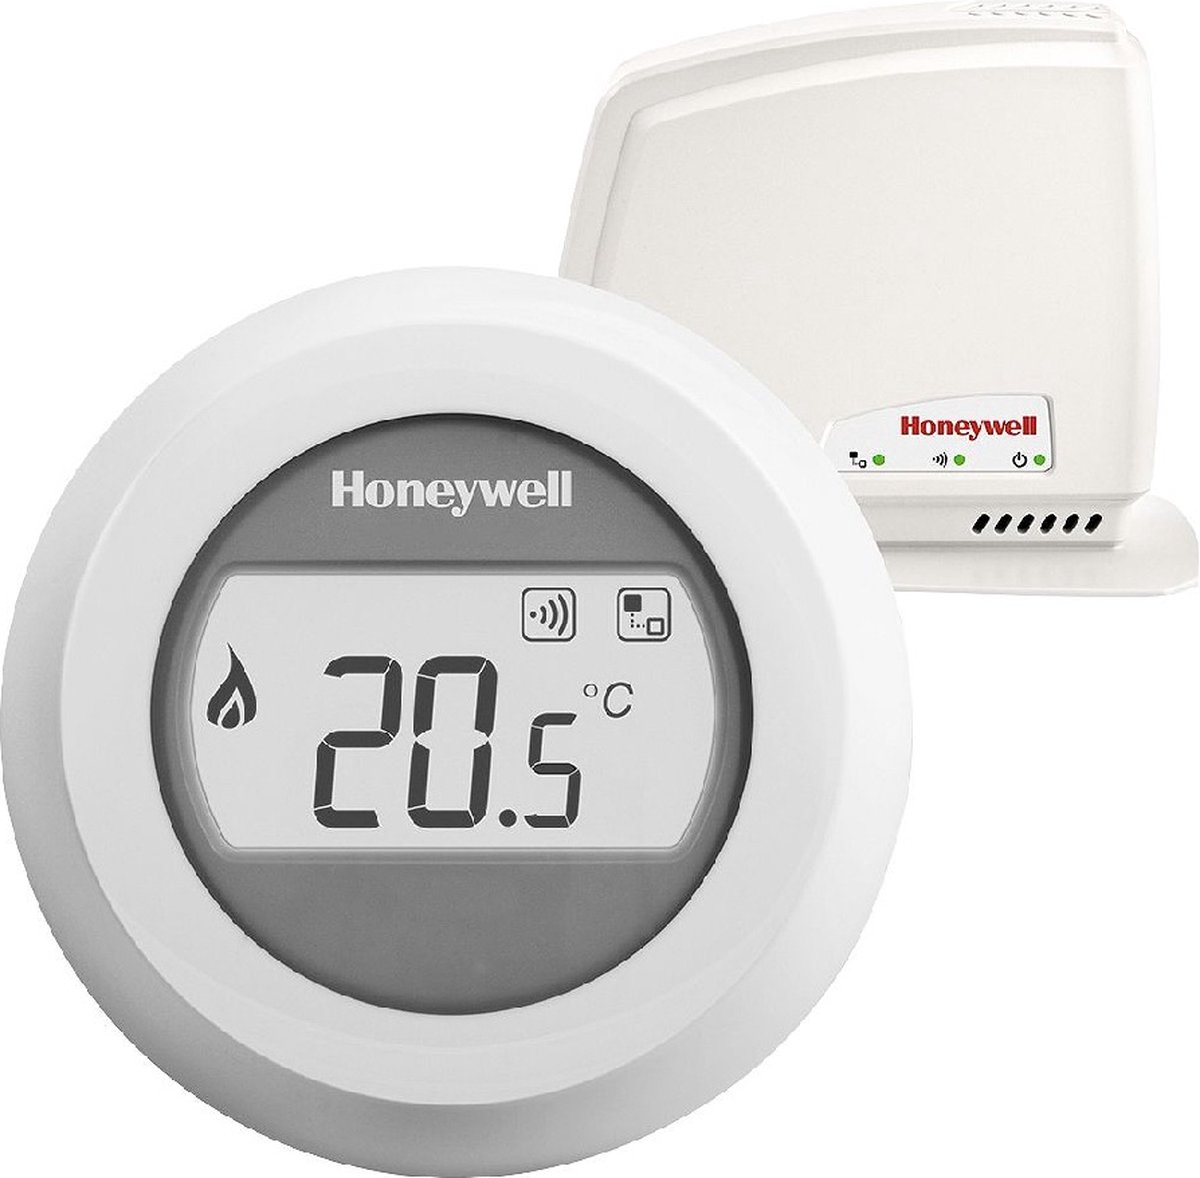 Honeywell Round Connected Modulation Thermostaat - Bedraad review